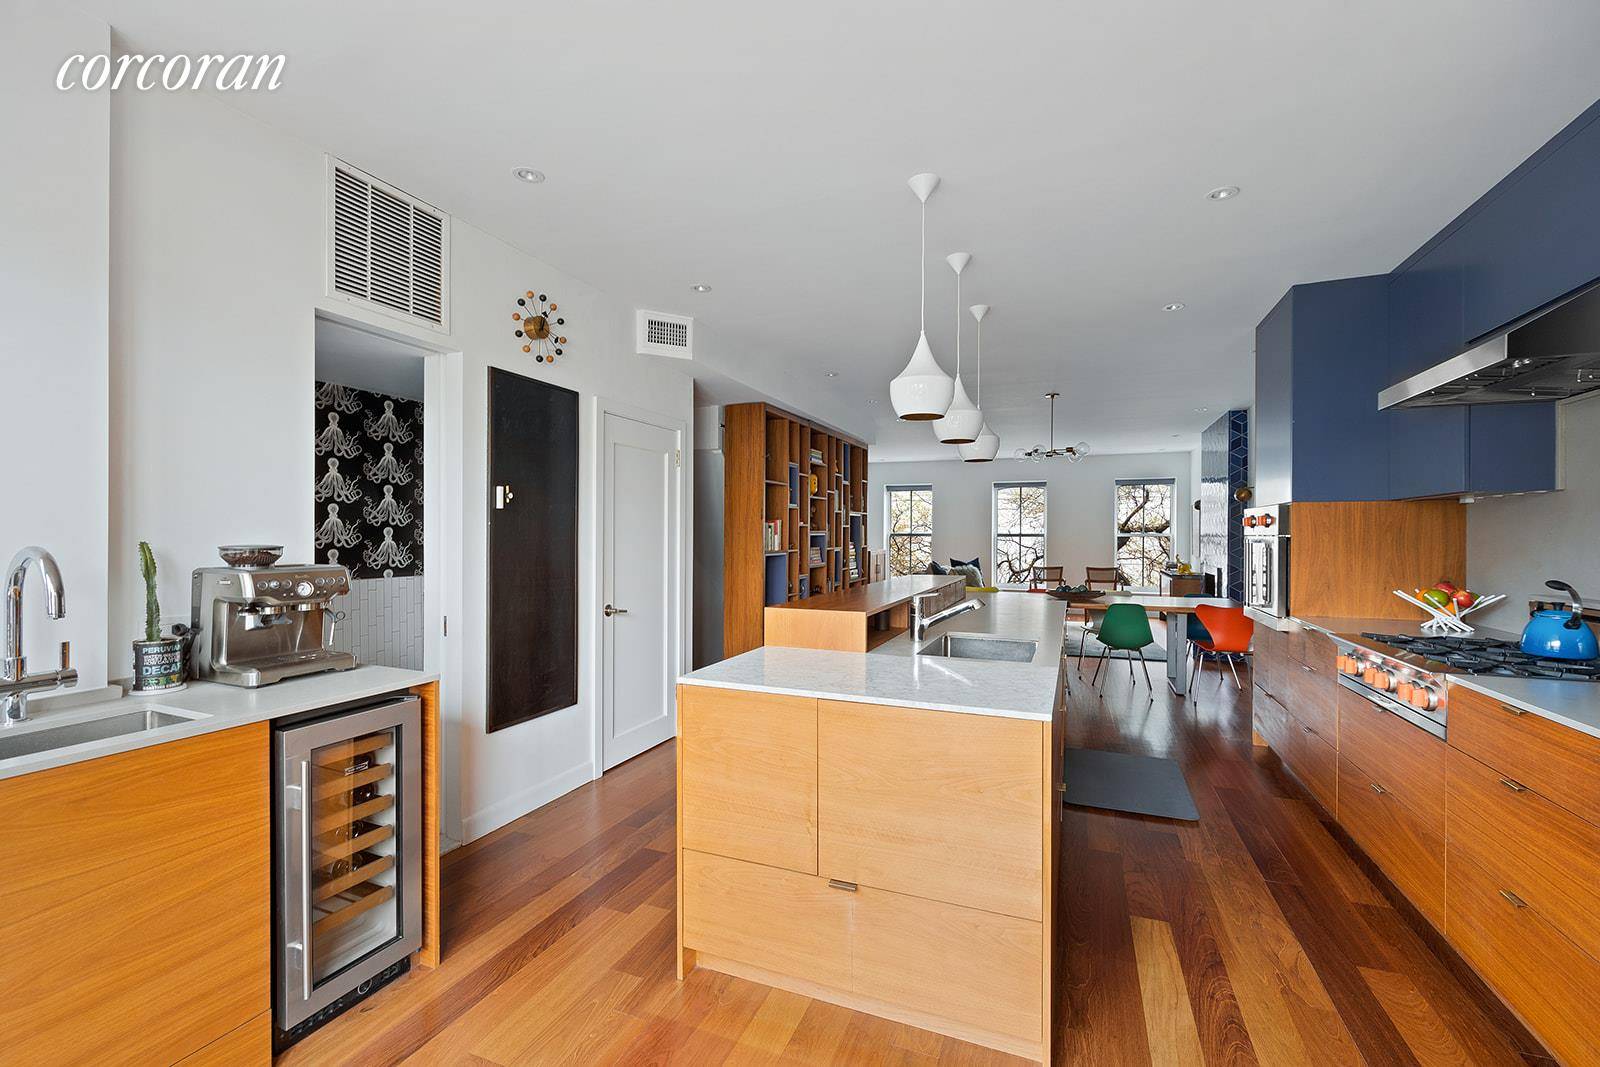 Impeccably renovated, boasting over 2000 square feet of living space across three floors, plus FOUR PRIVATE OUTDOOR TERRACES, this expansive home is truly a gem.